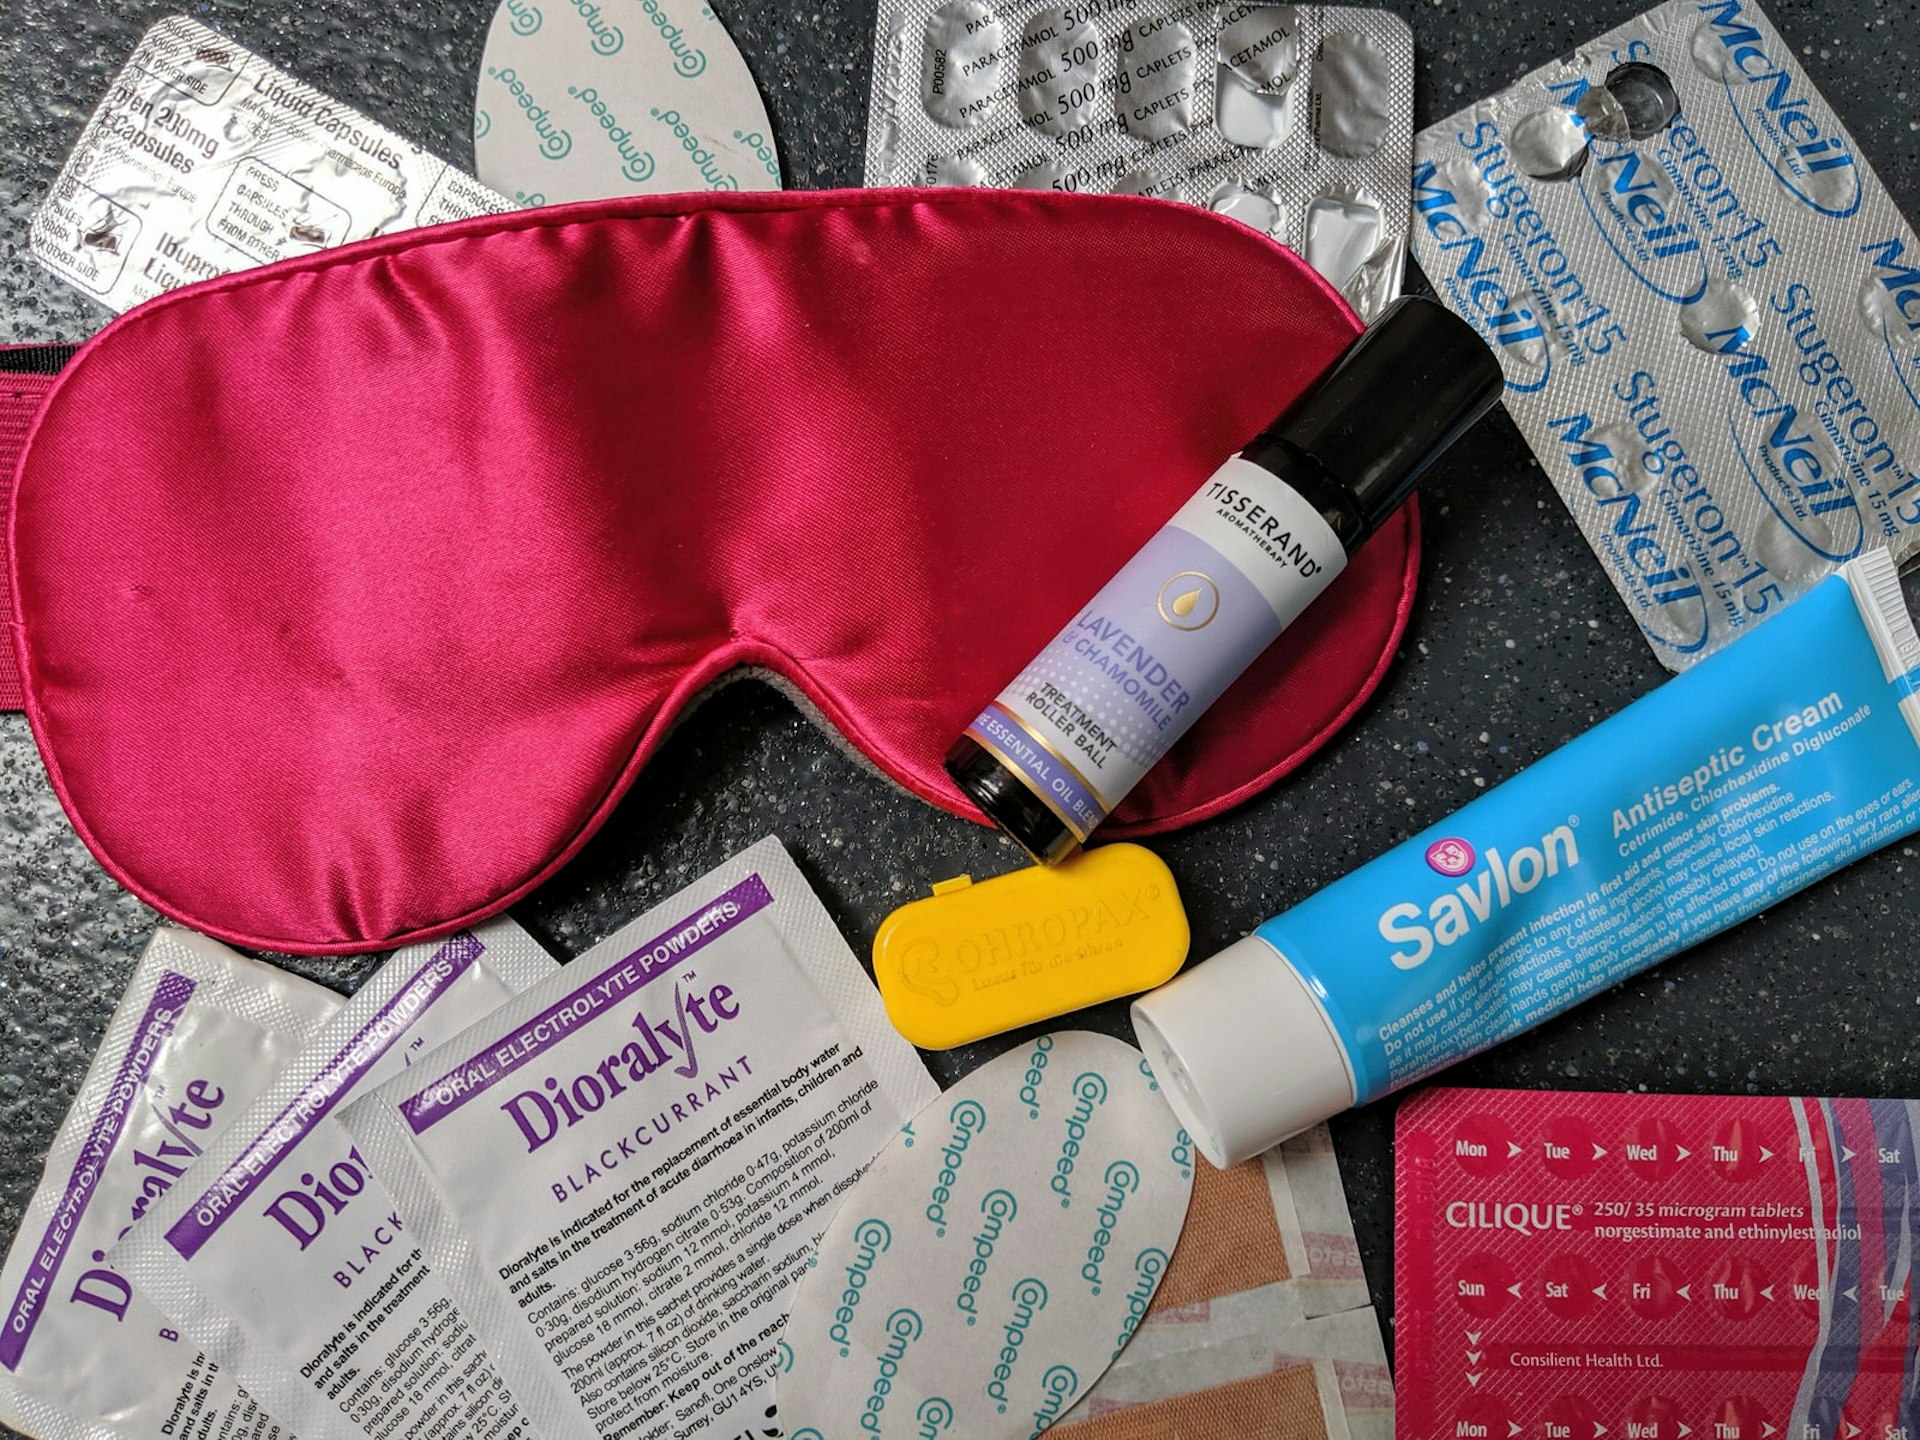 An arrangement of health essentials, including a pink sleep mask, antiseptic cream, painkillers, plasters and ear plugs